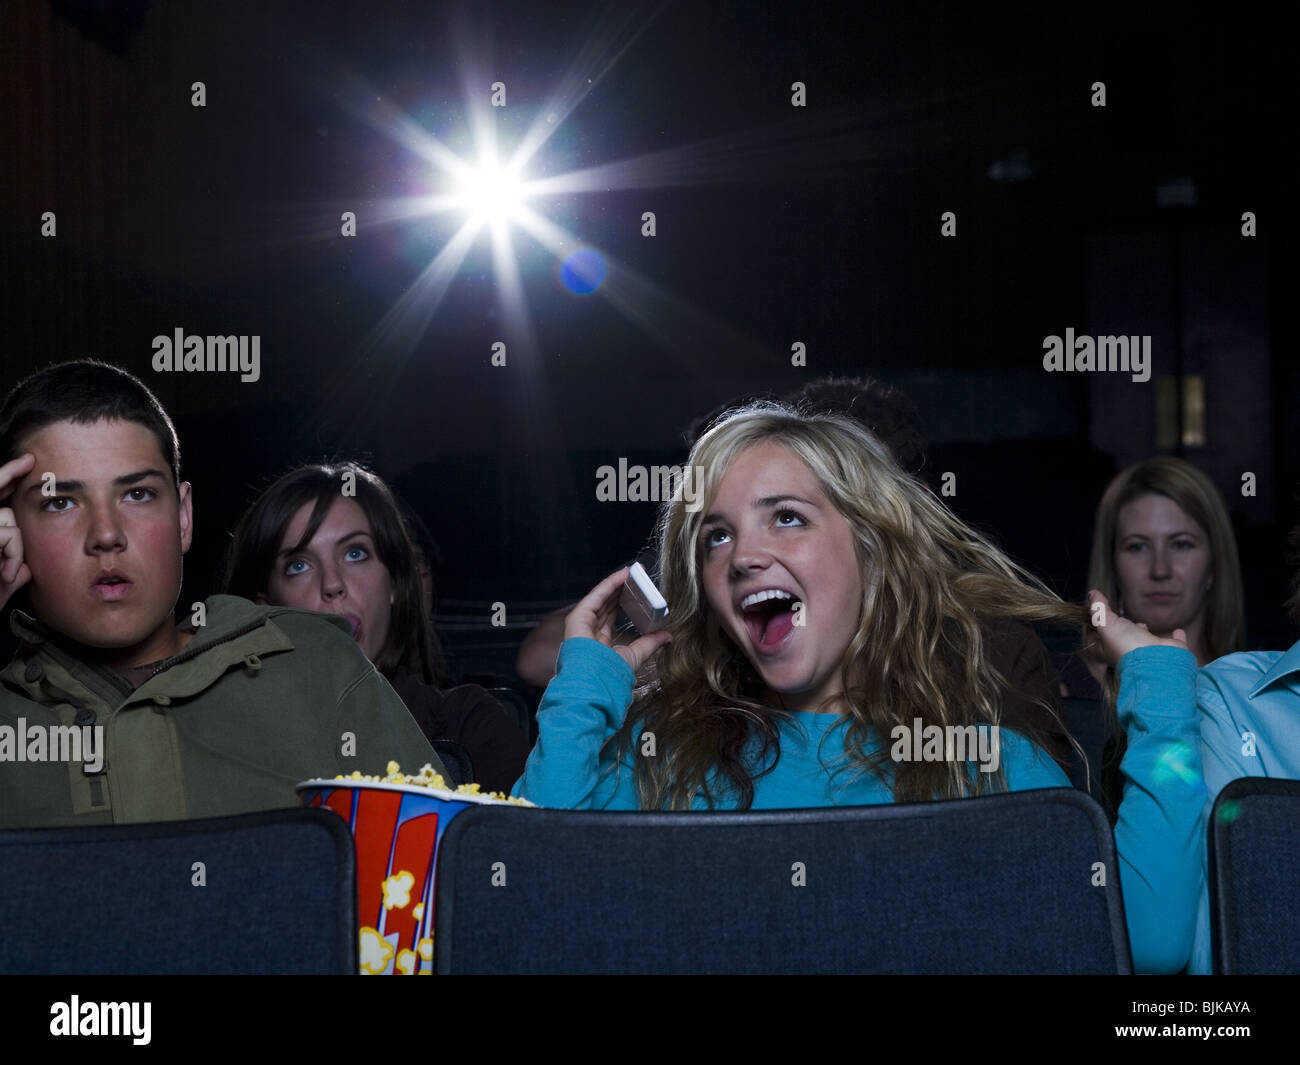 Girl talking on cell phone at movie theater with annoyed boy Stock Photo